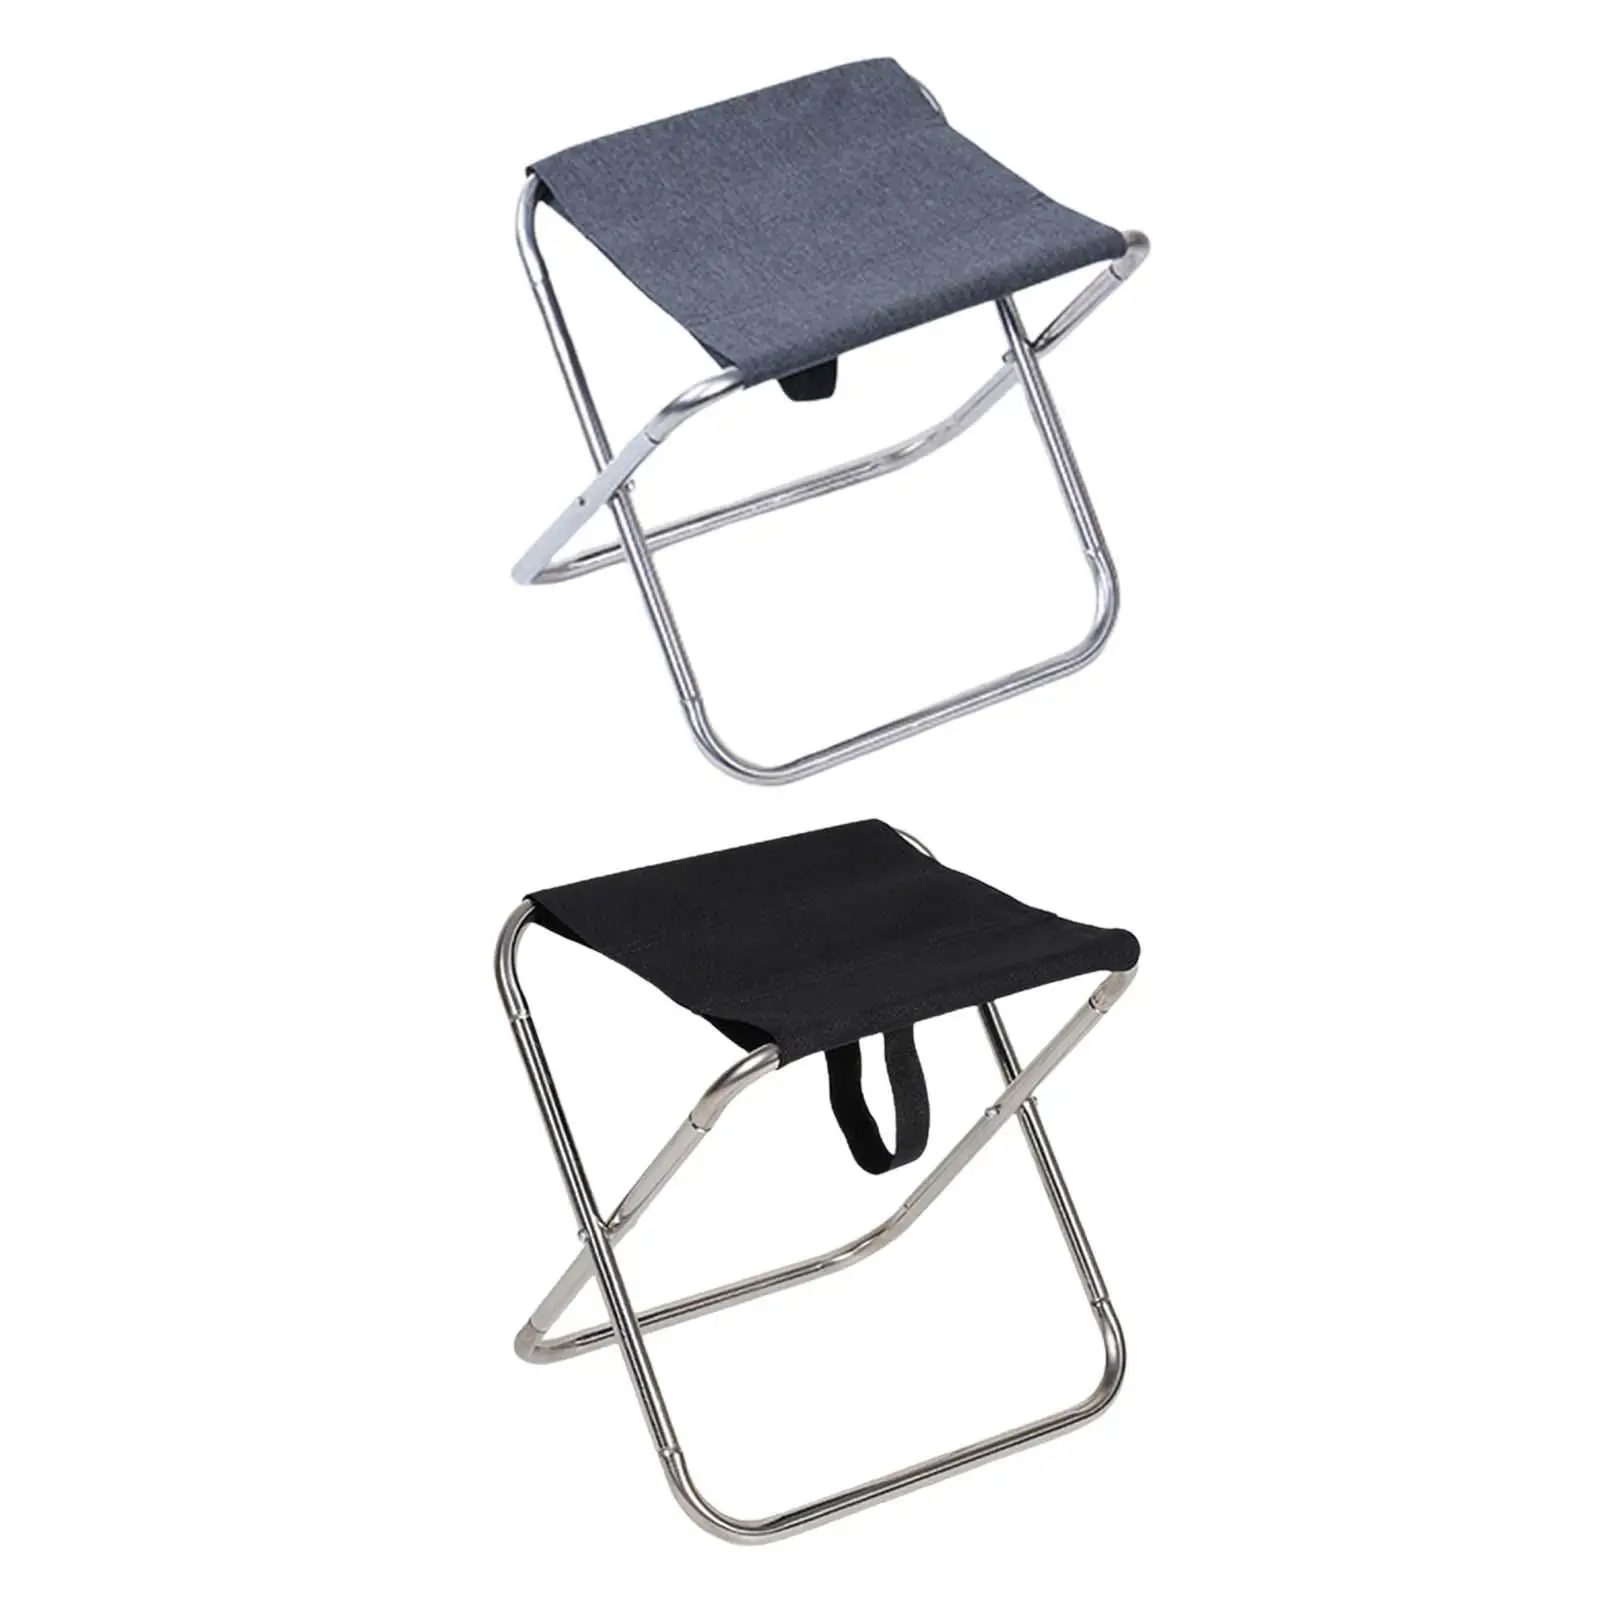 Folding Stool Camping Foldable Camp Stool Wear Resistant Lightweight Fishing Chair for Sports Traveling Fishing Garden